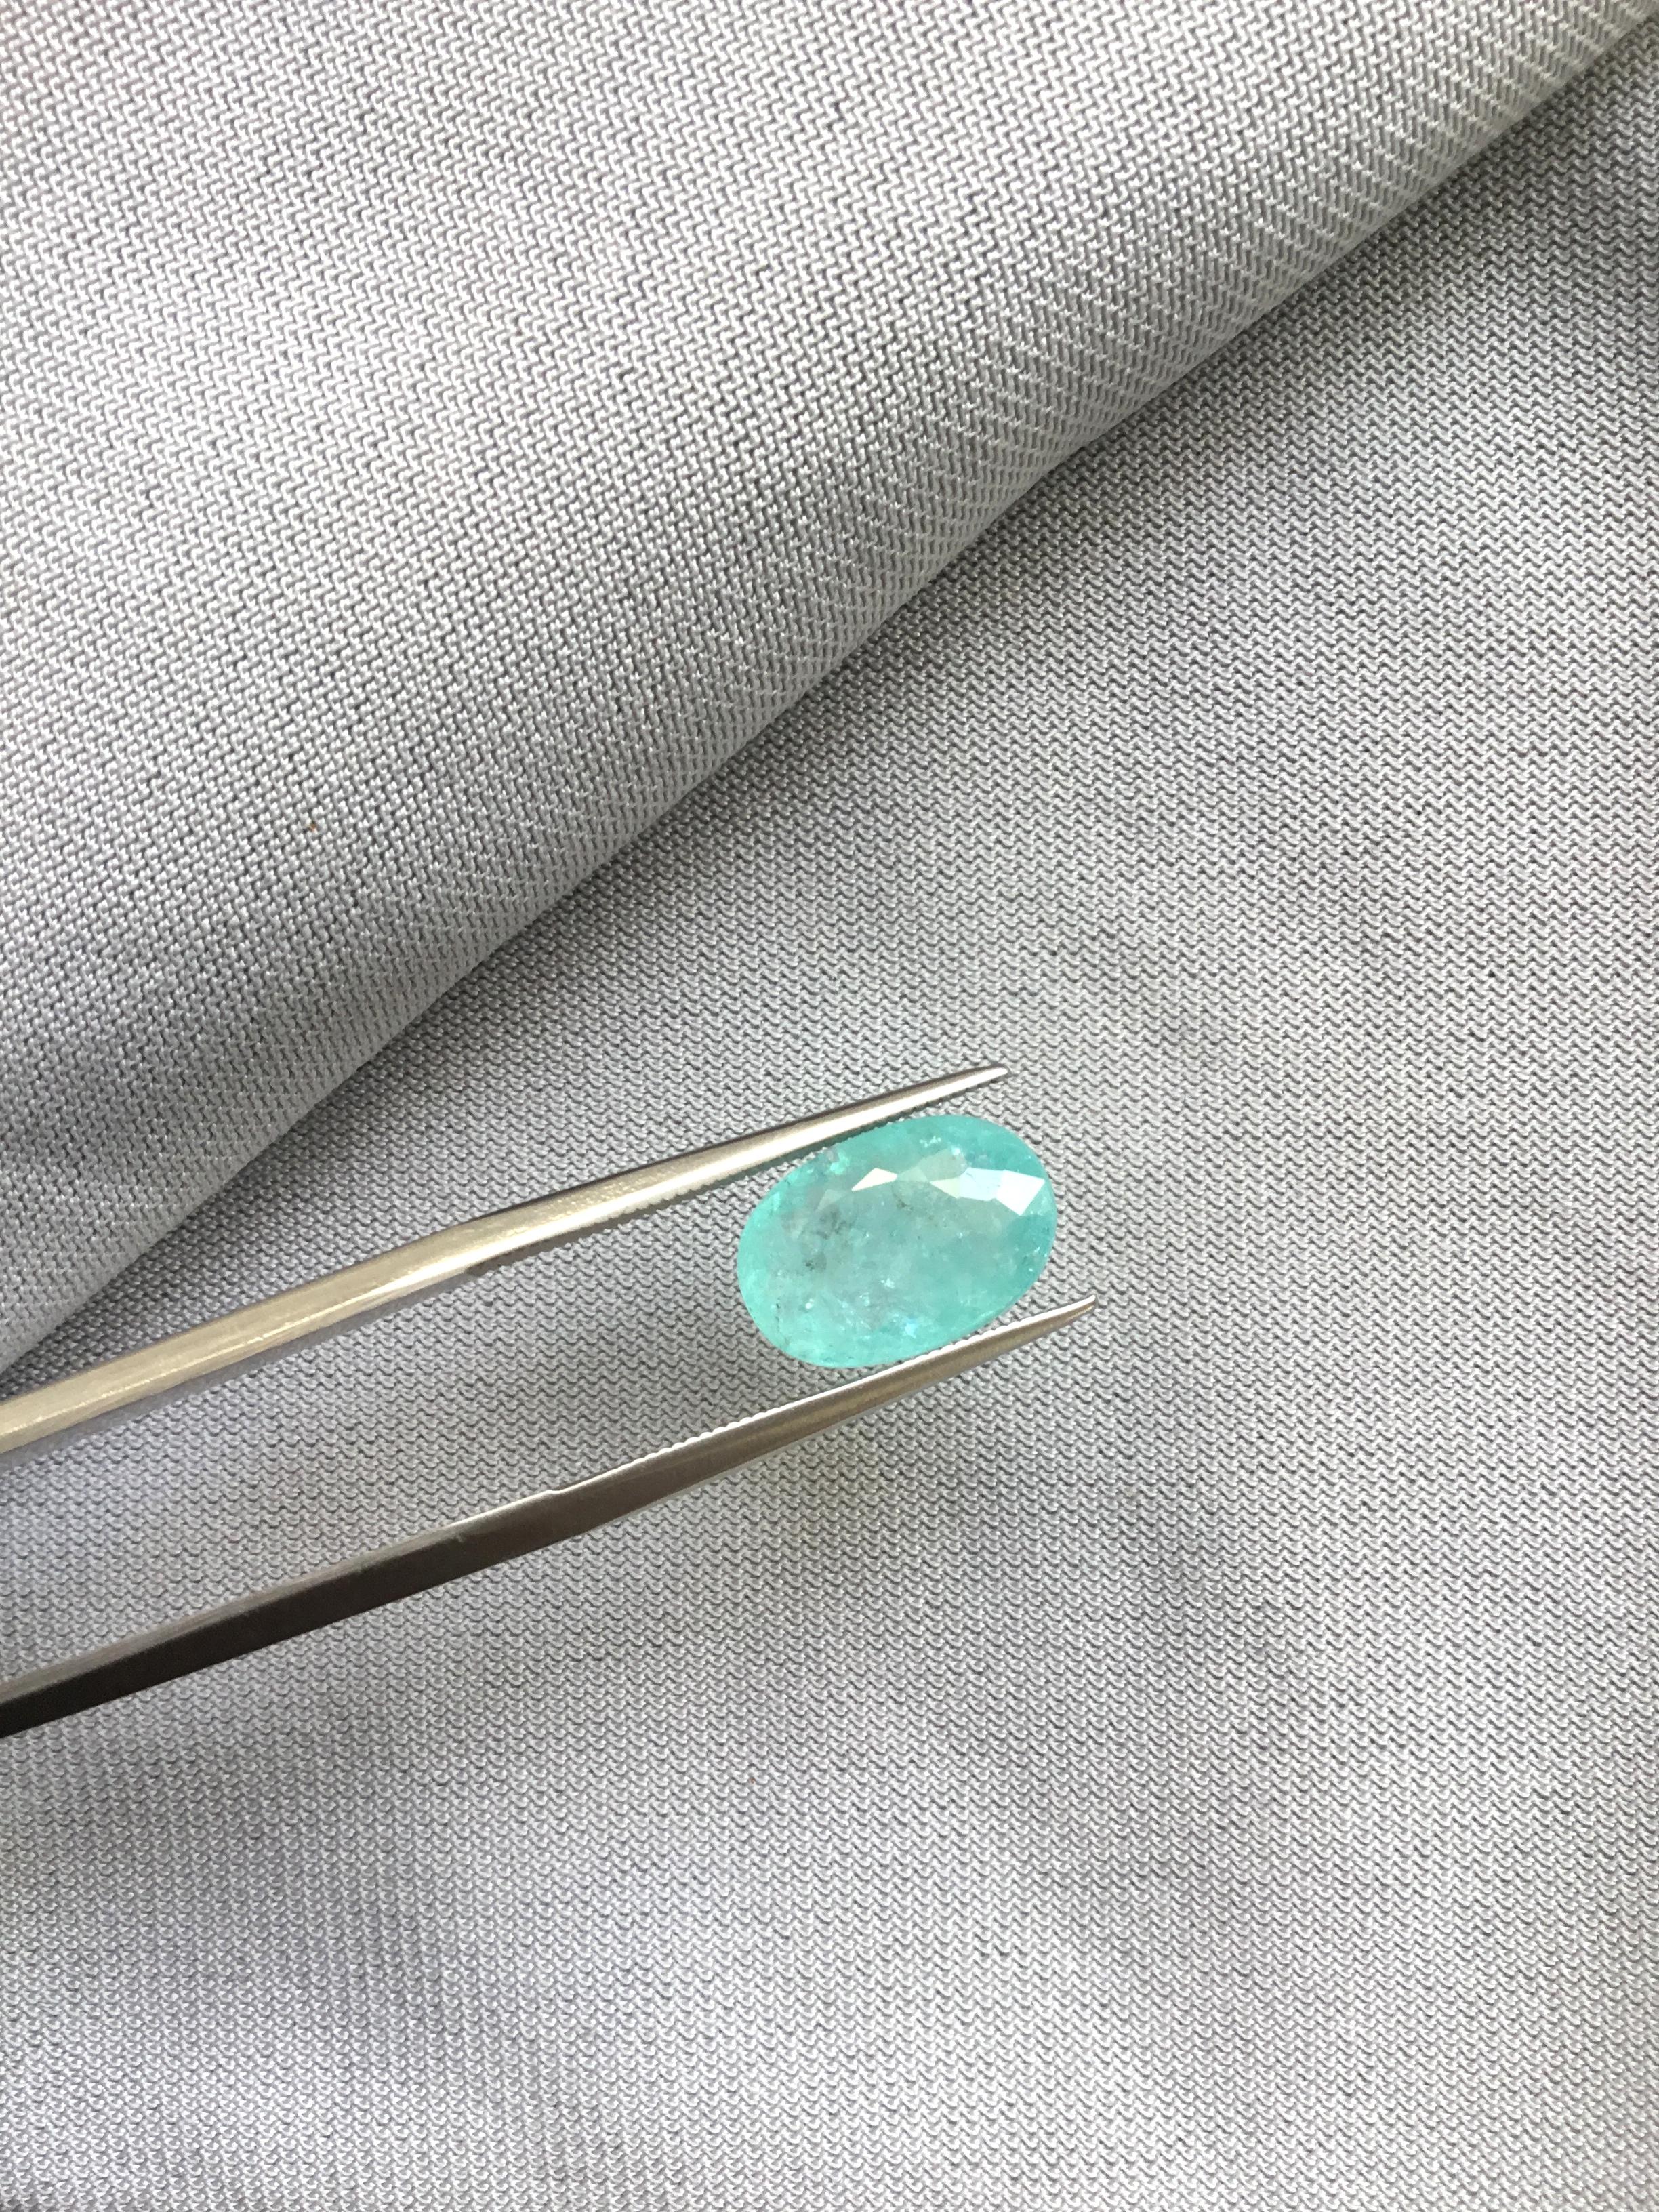 Exceptional 4.09 Carats Paraiba Tourmaline Oval Cut Stone for Fine Jewelry